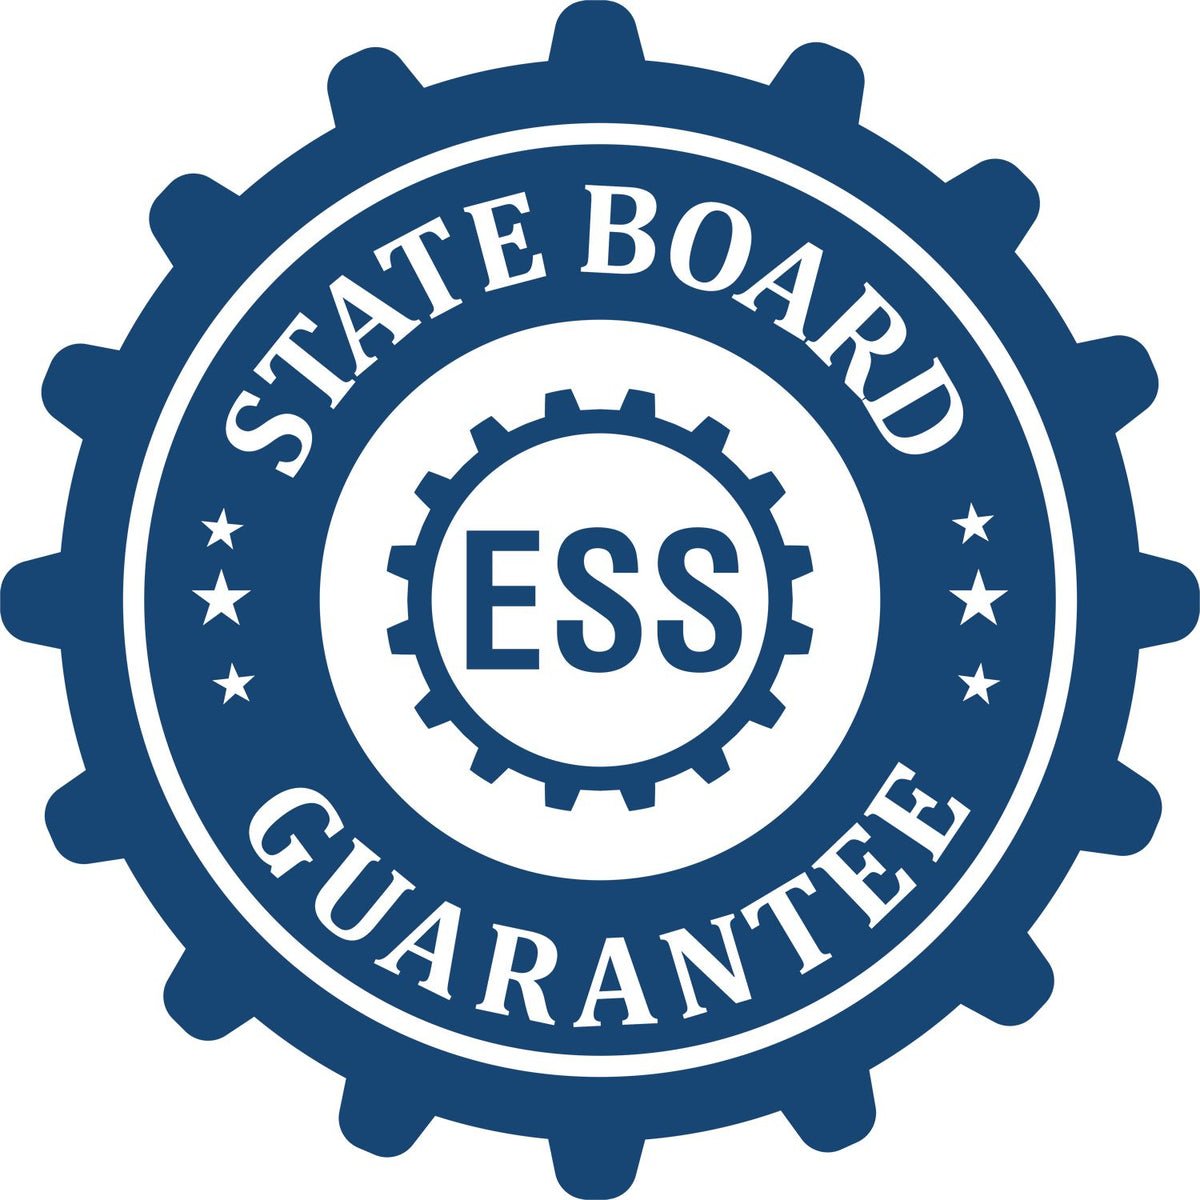 An emblem in a gear shape illustrating a state board guarantee for the Heavy-Duty Maryland Rectangular Notary Stamp product.